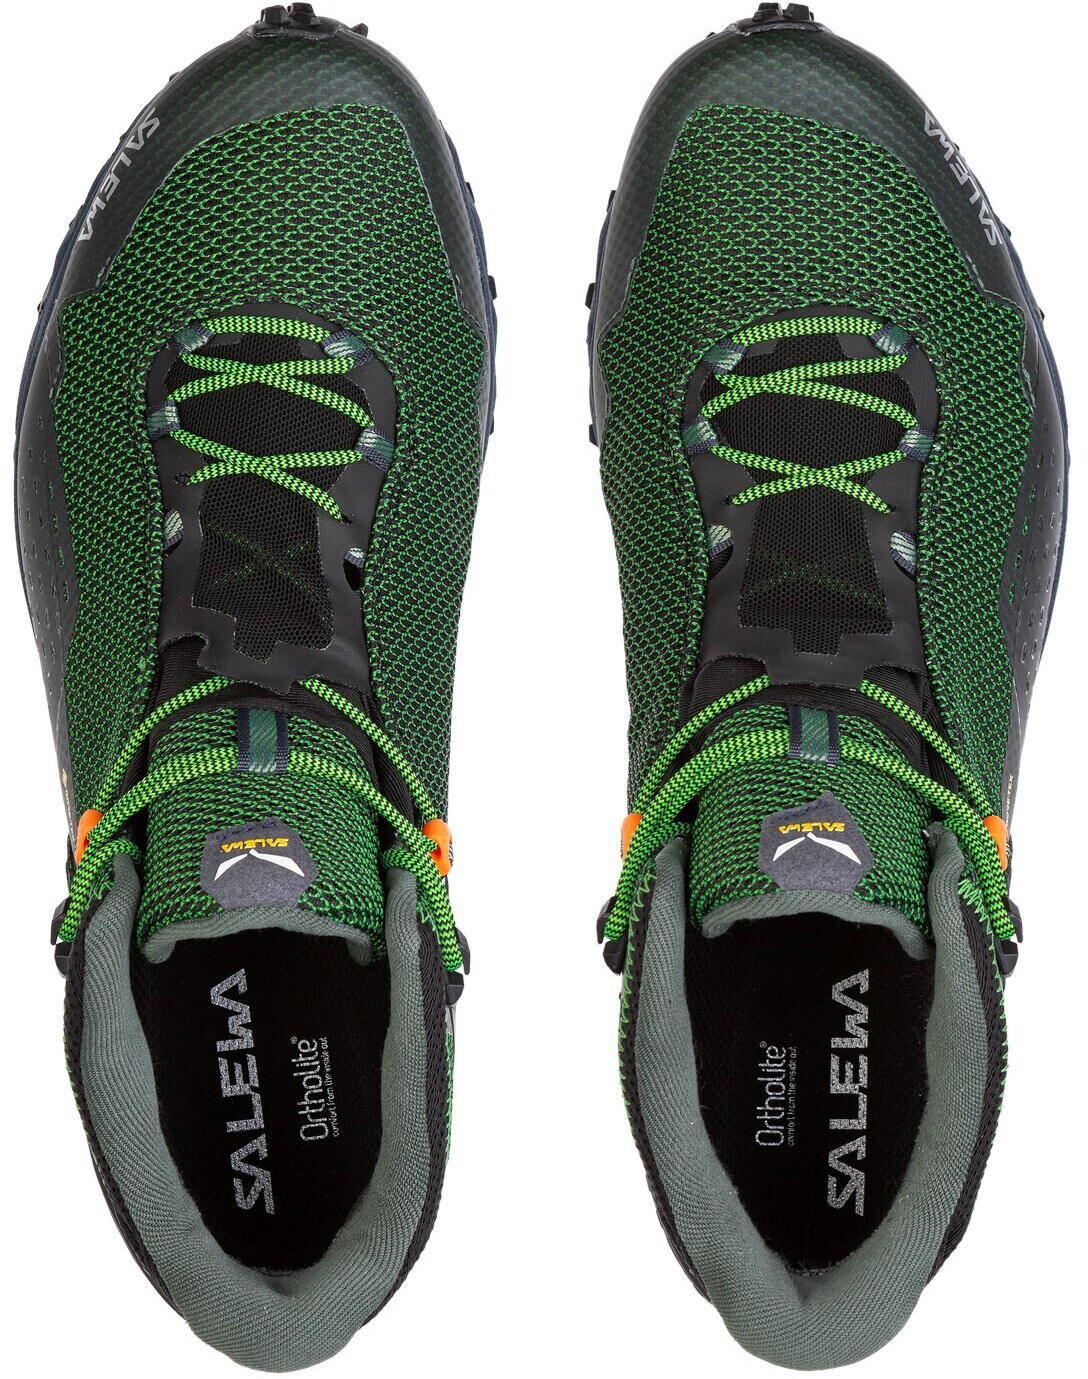 Buy Salewa Ultra Flex 2 GTX Mid raw green/pale frog from £111.99 (Today ...